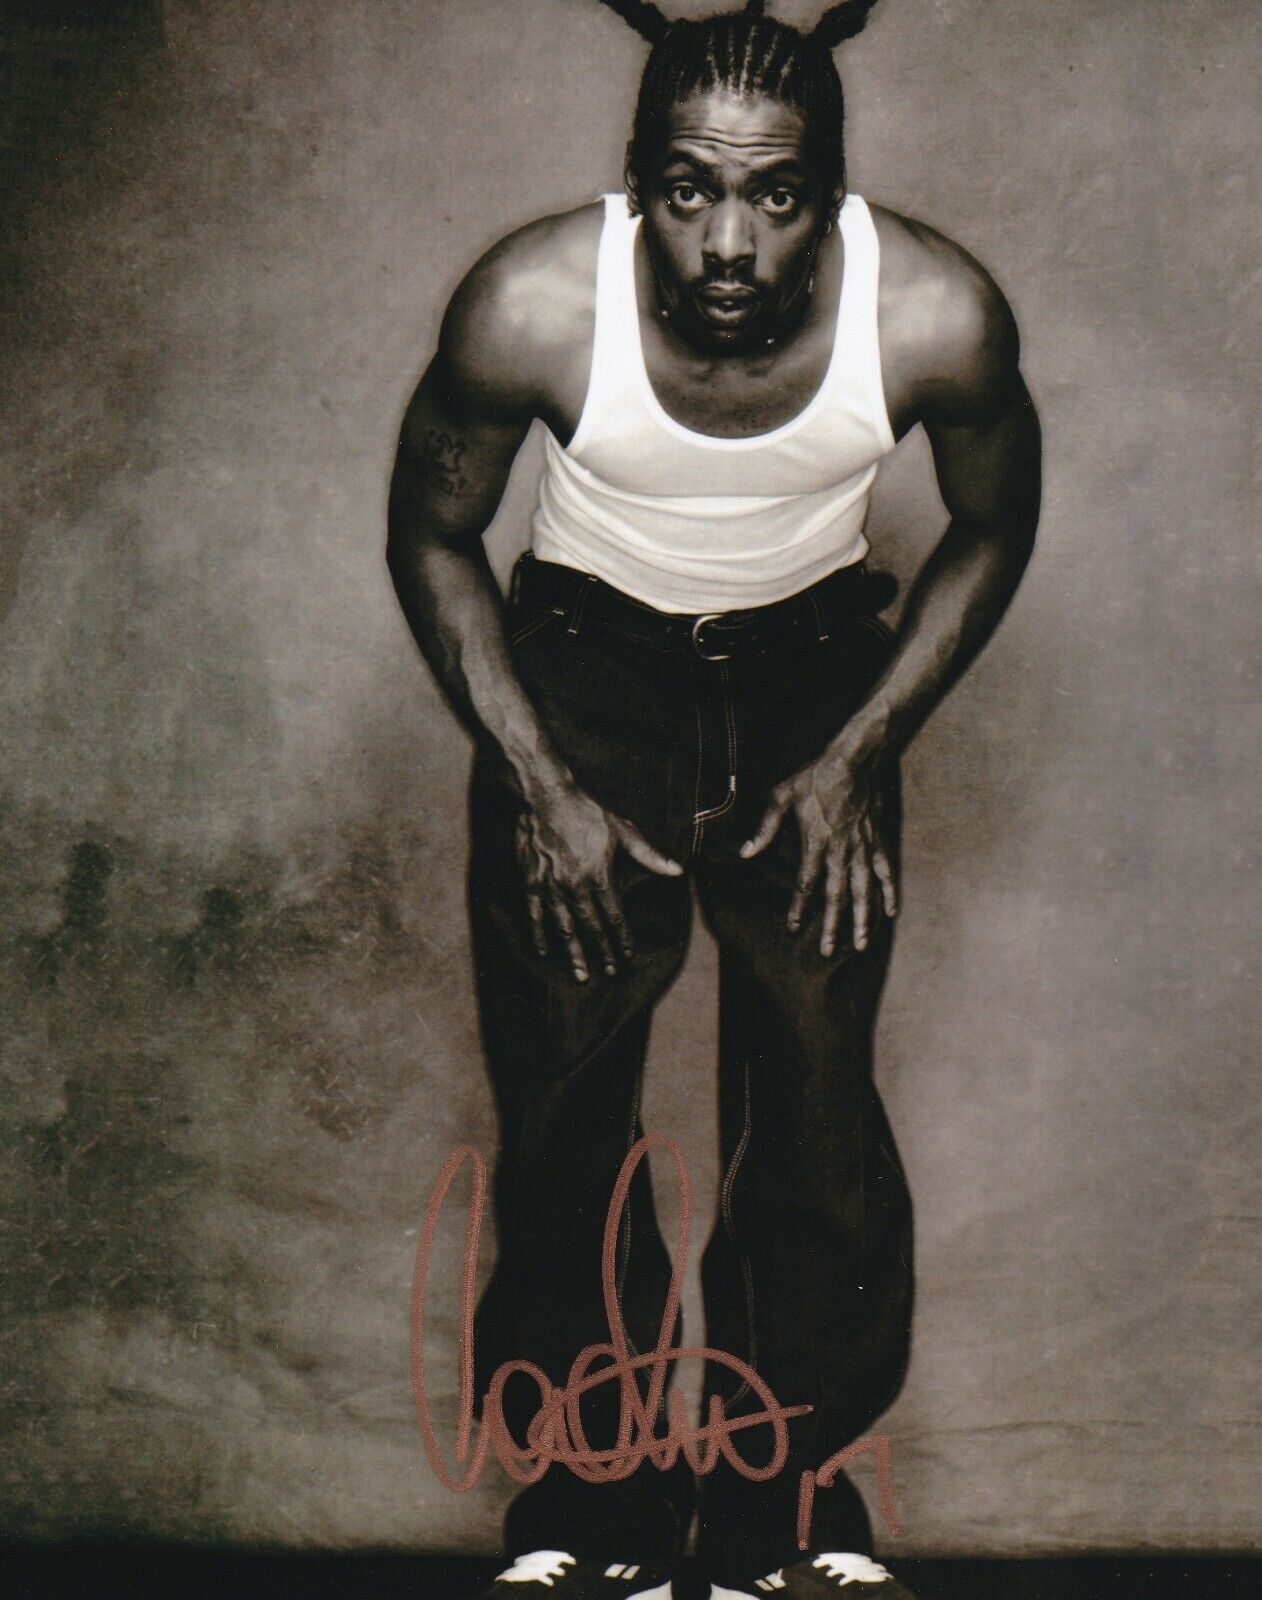 Coolio REAL hand SIGNED 8x10 Photo Poster painting #3 COA Autographed Rapper